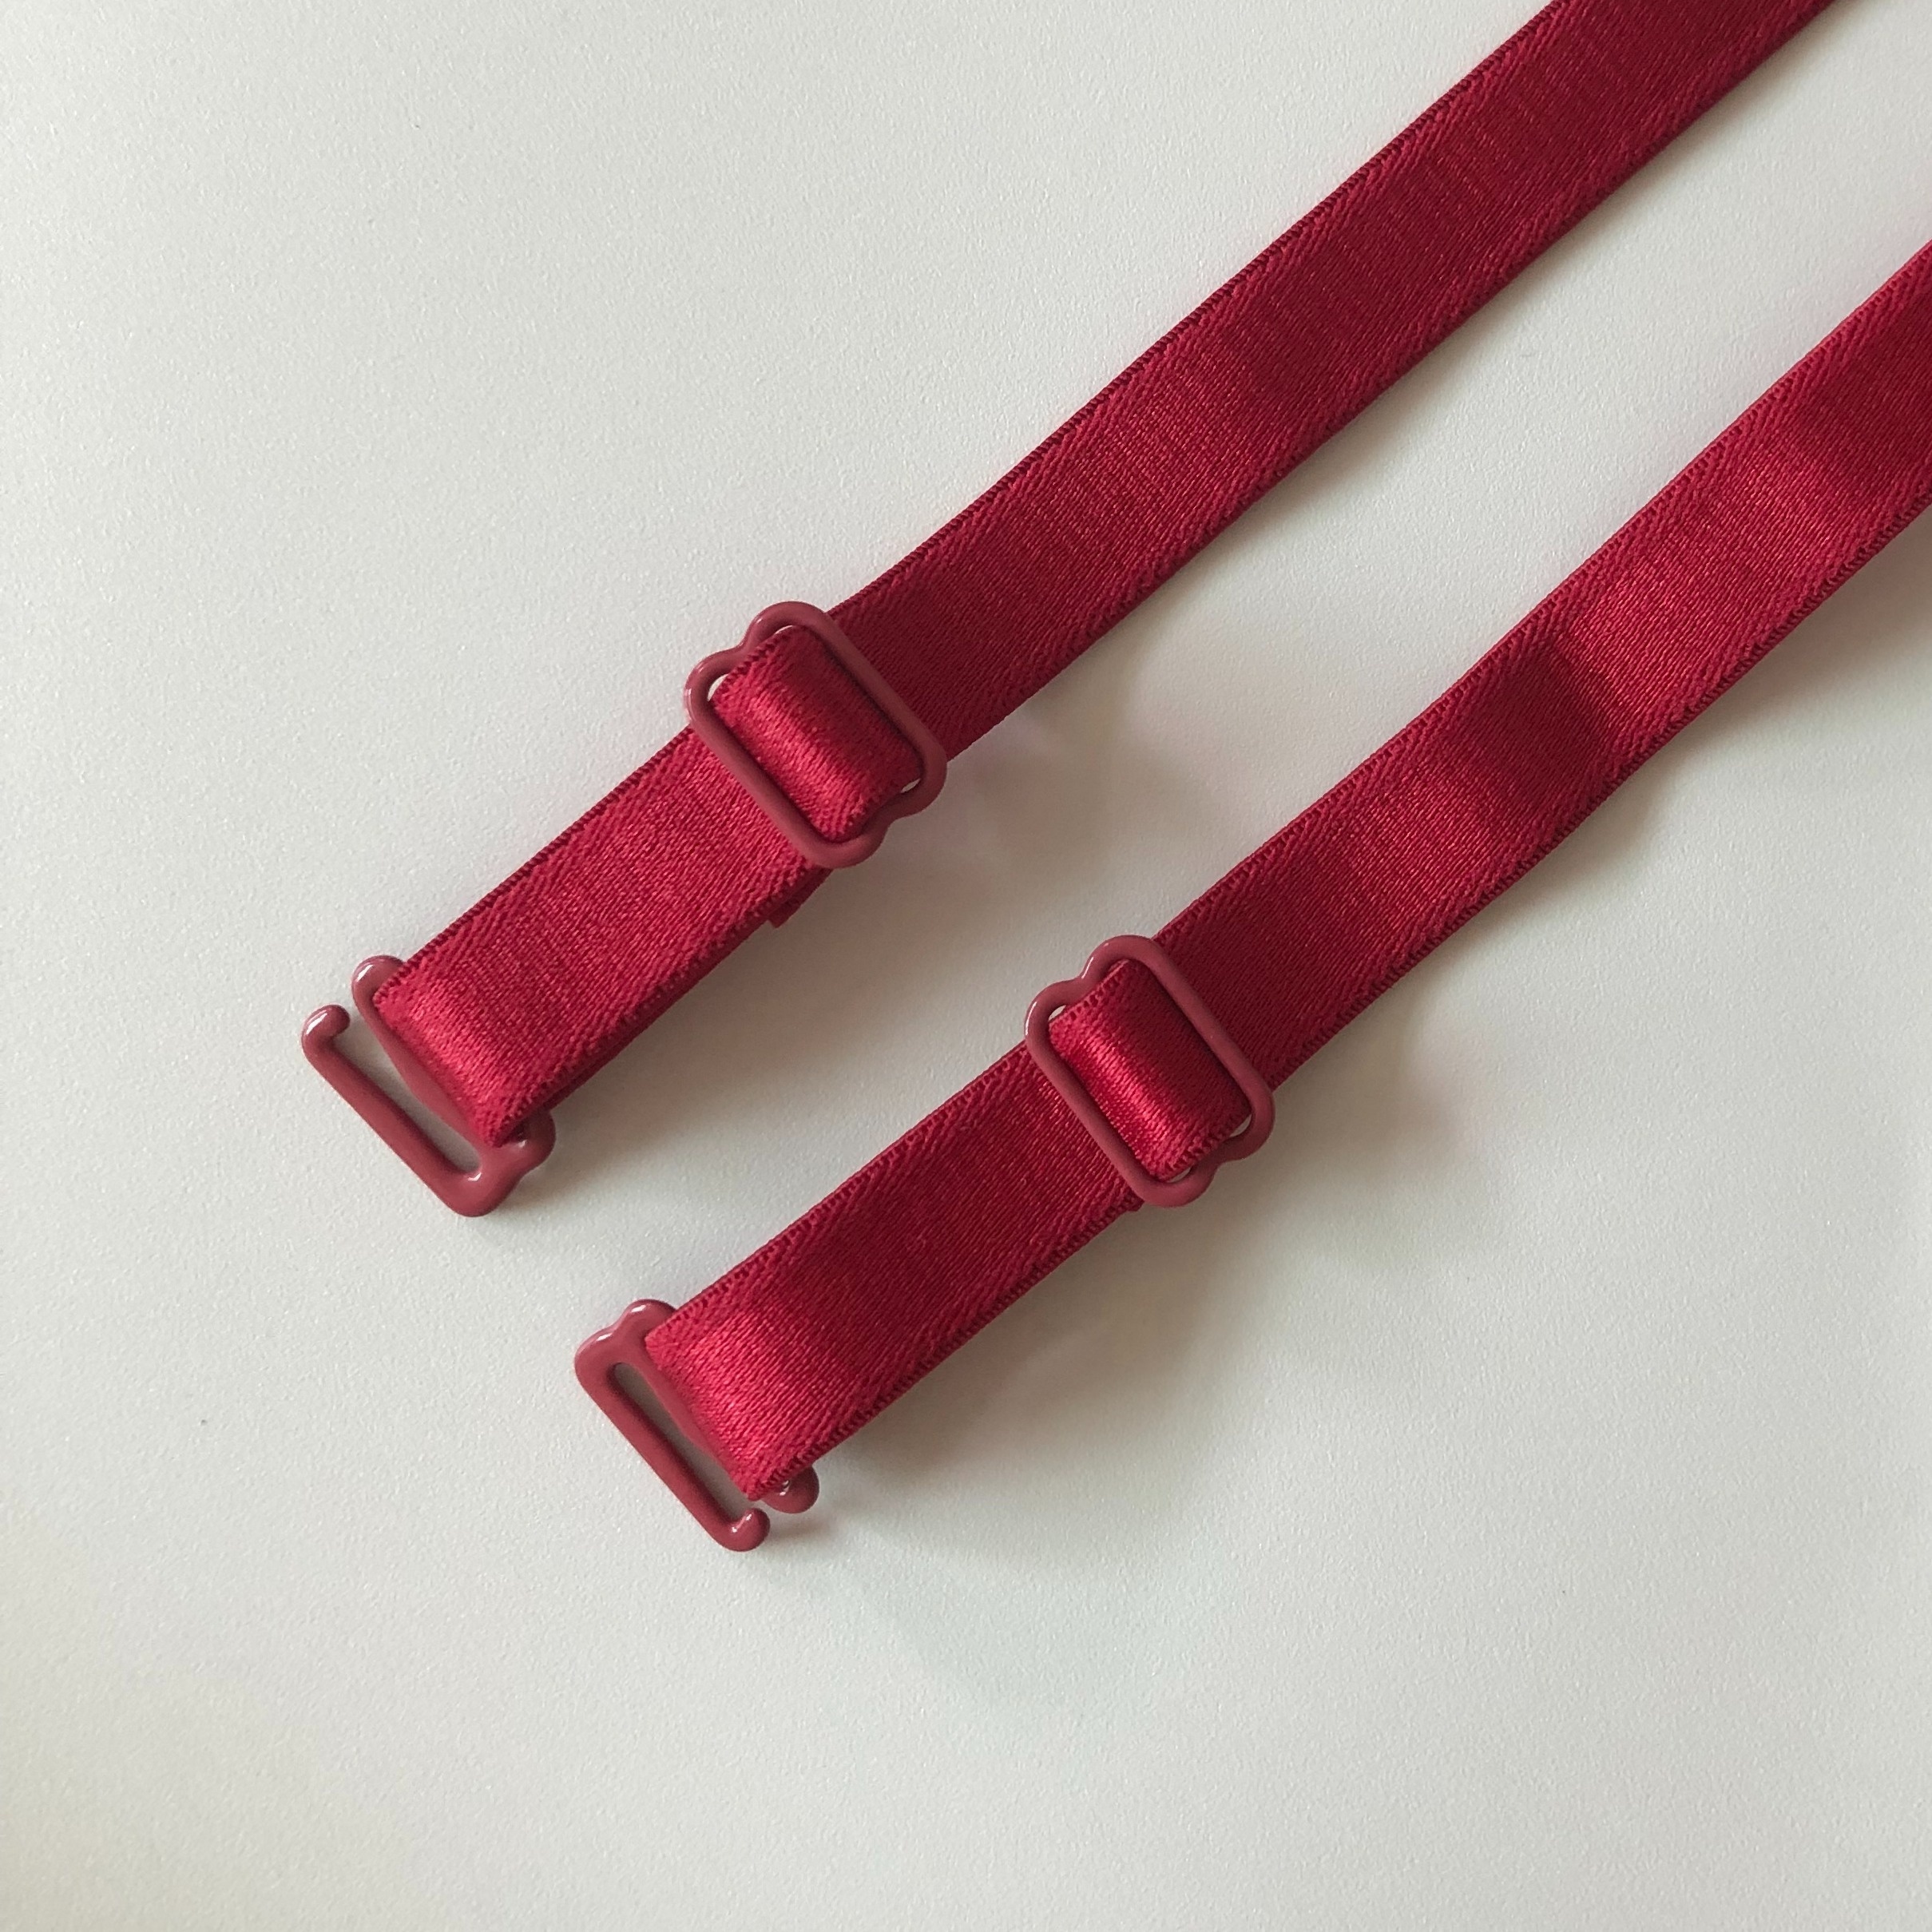 25mm/1in Shoulder Bra Straps Replacement 25mm Width Elastic Adjustable  Removable Multi Color Lady Bra Strap Accessories Lingerie - AliExpress